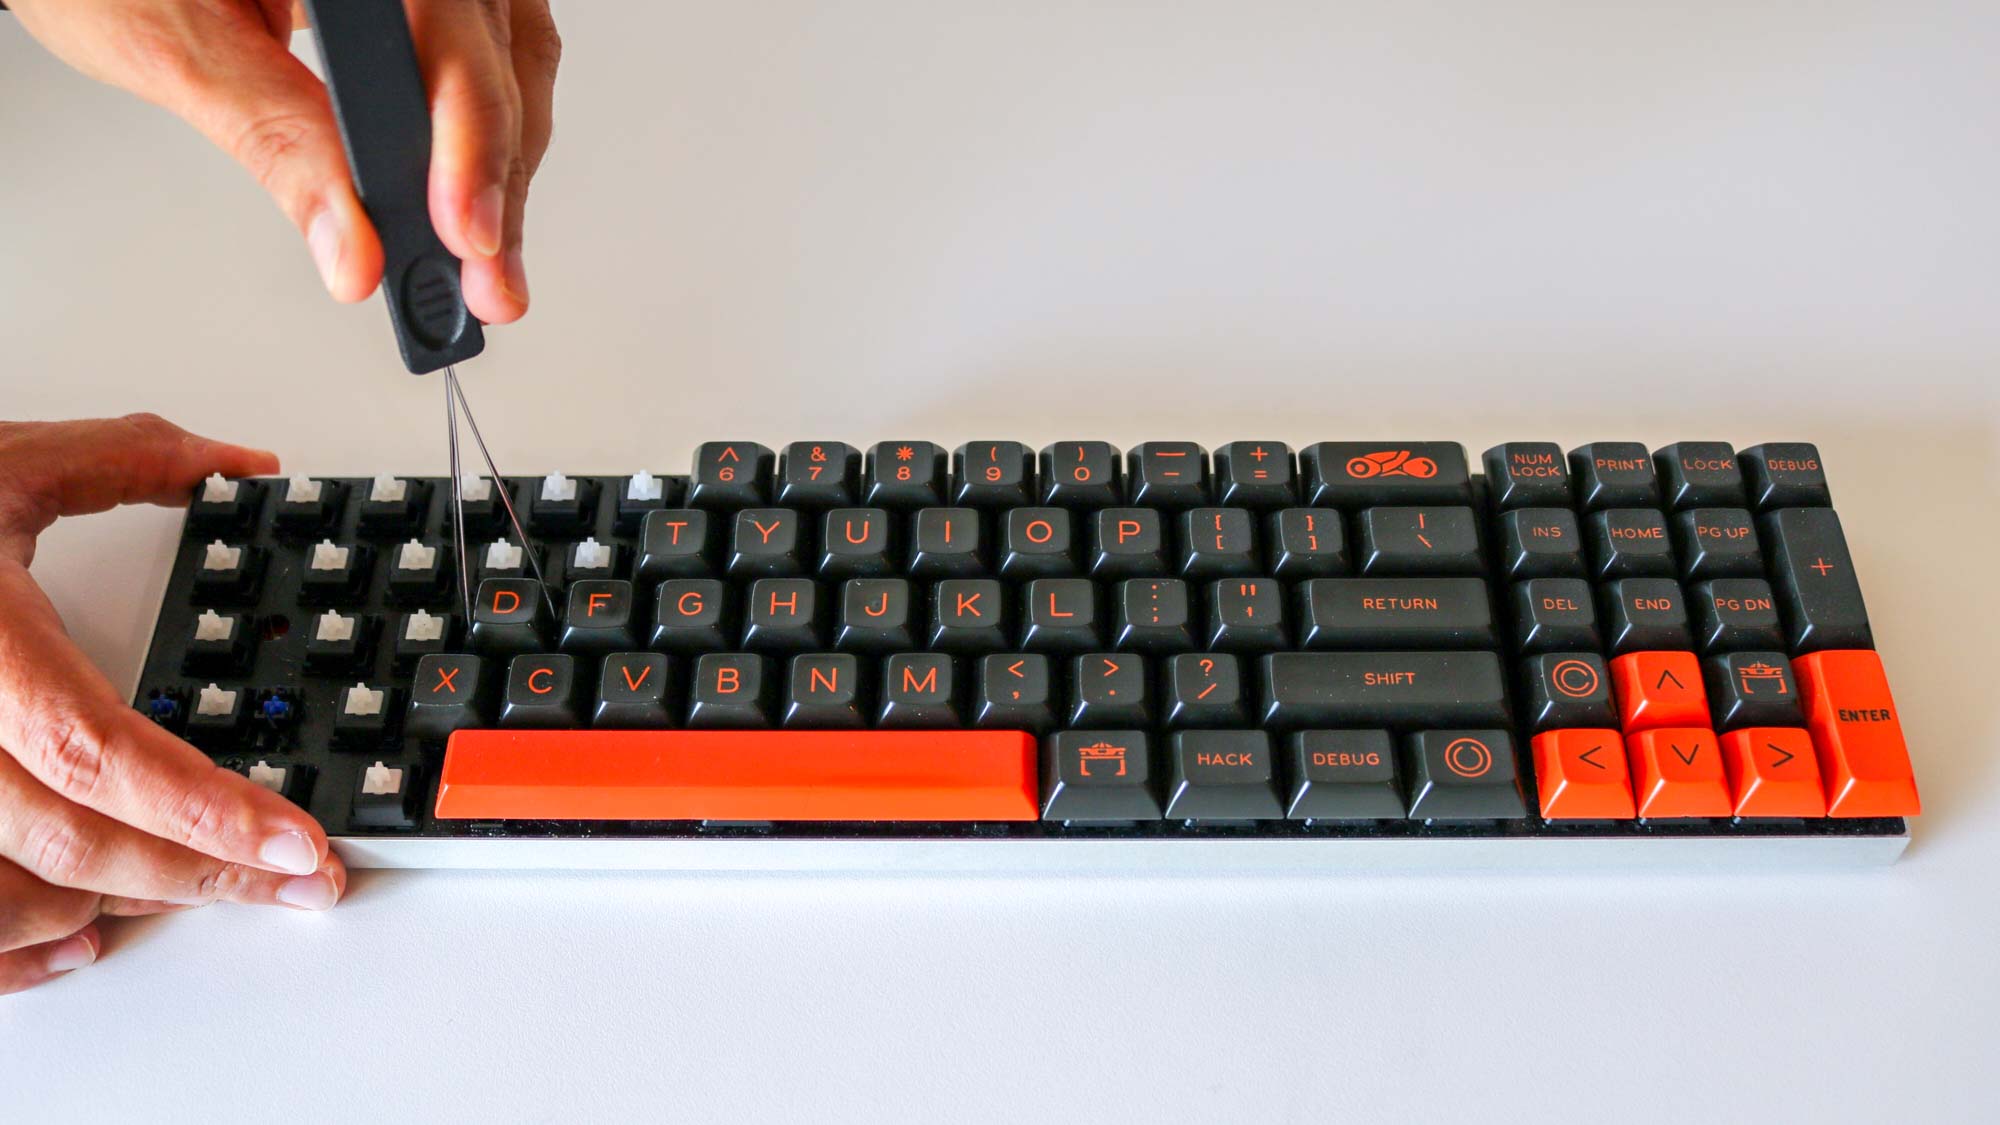 Using a keycap puller to remove keycaps from a mechanical keyboard